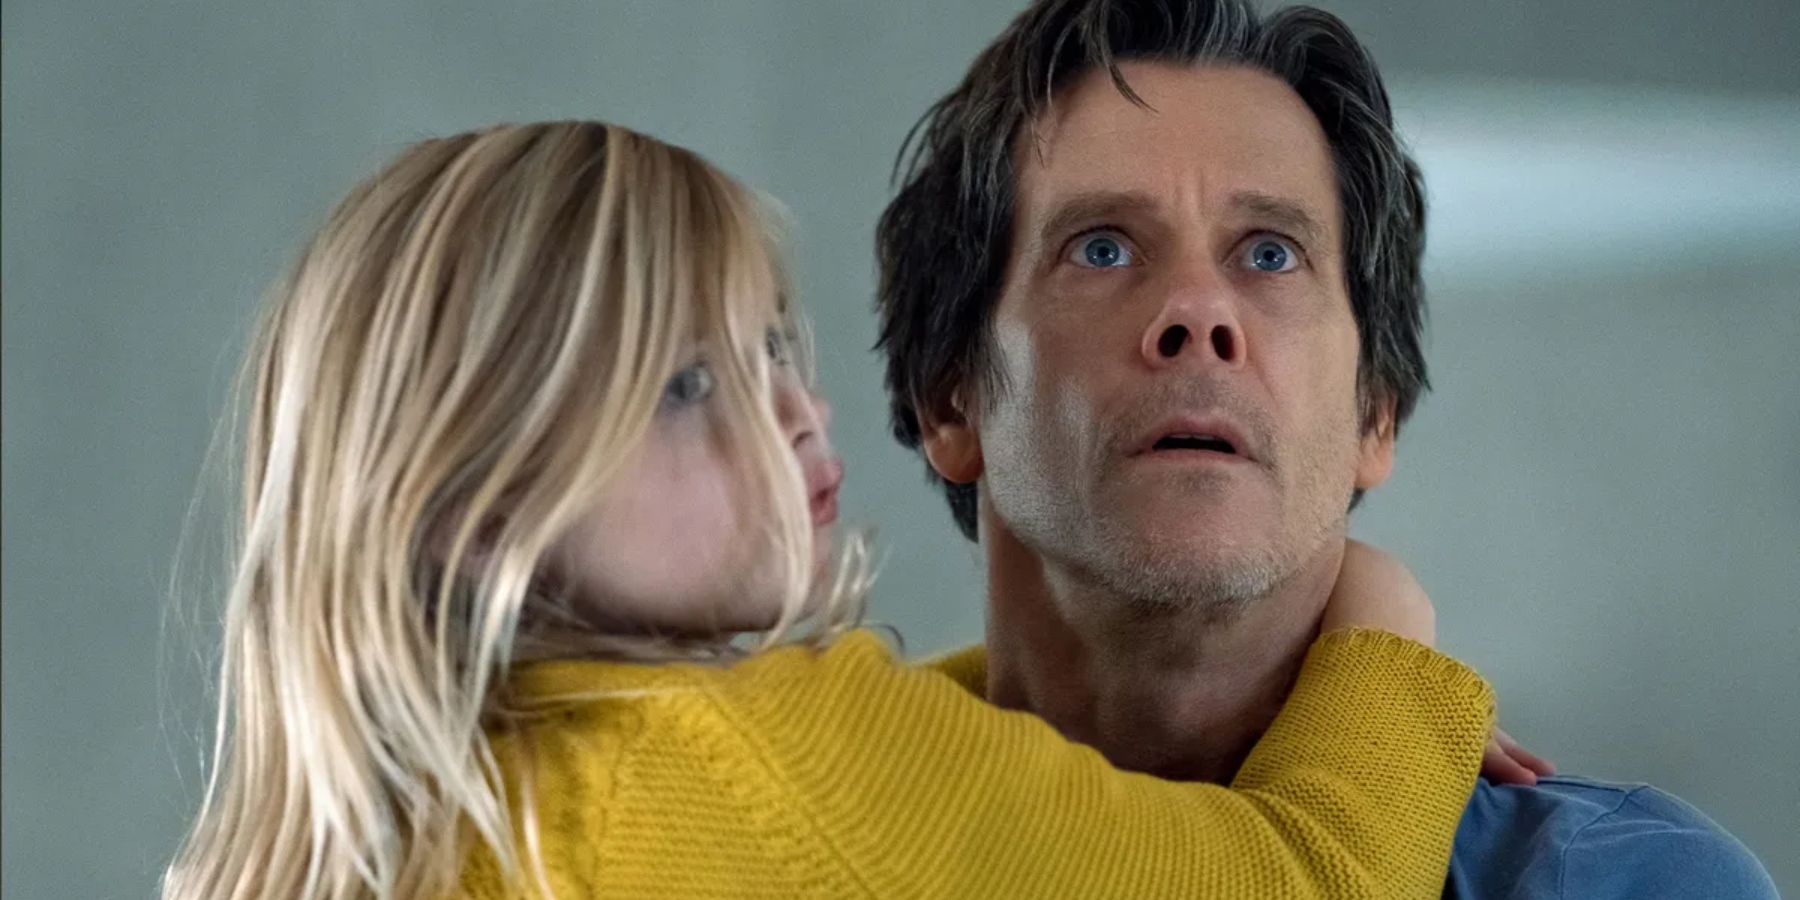 Kevin Bacon as Theo holding Avery Essex as Ella in You Should Have Left